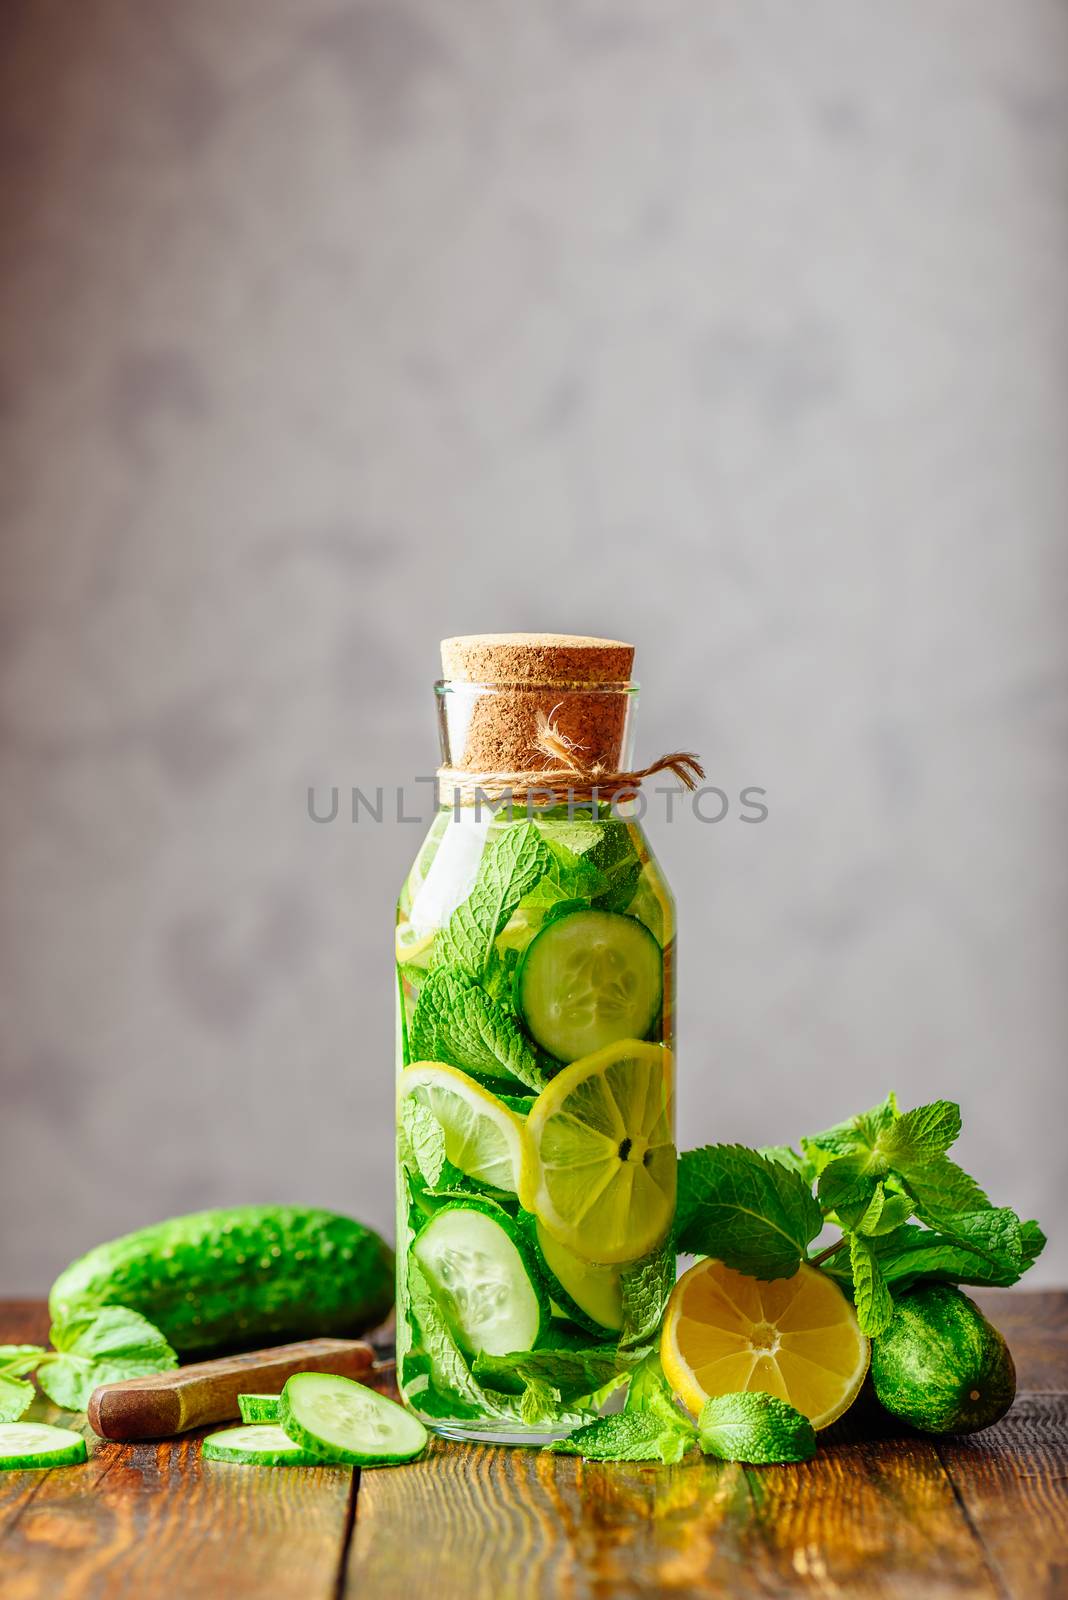 Bottle of Water Infused with Sliced Lemon, Cucumber and Mint Leaves. Ingredients and Knife on Table. Copy Space on the Top. Vertical Orientation.